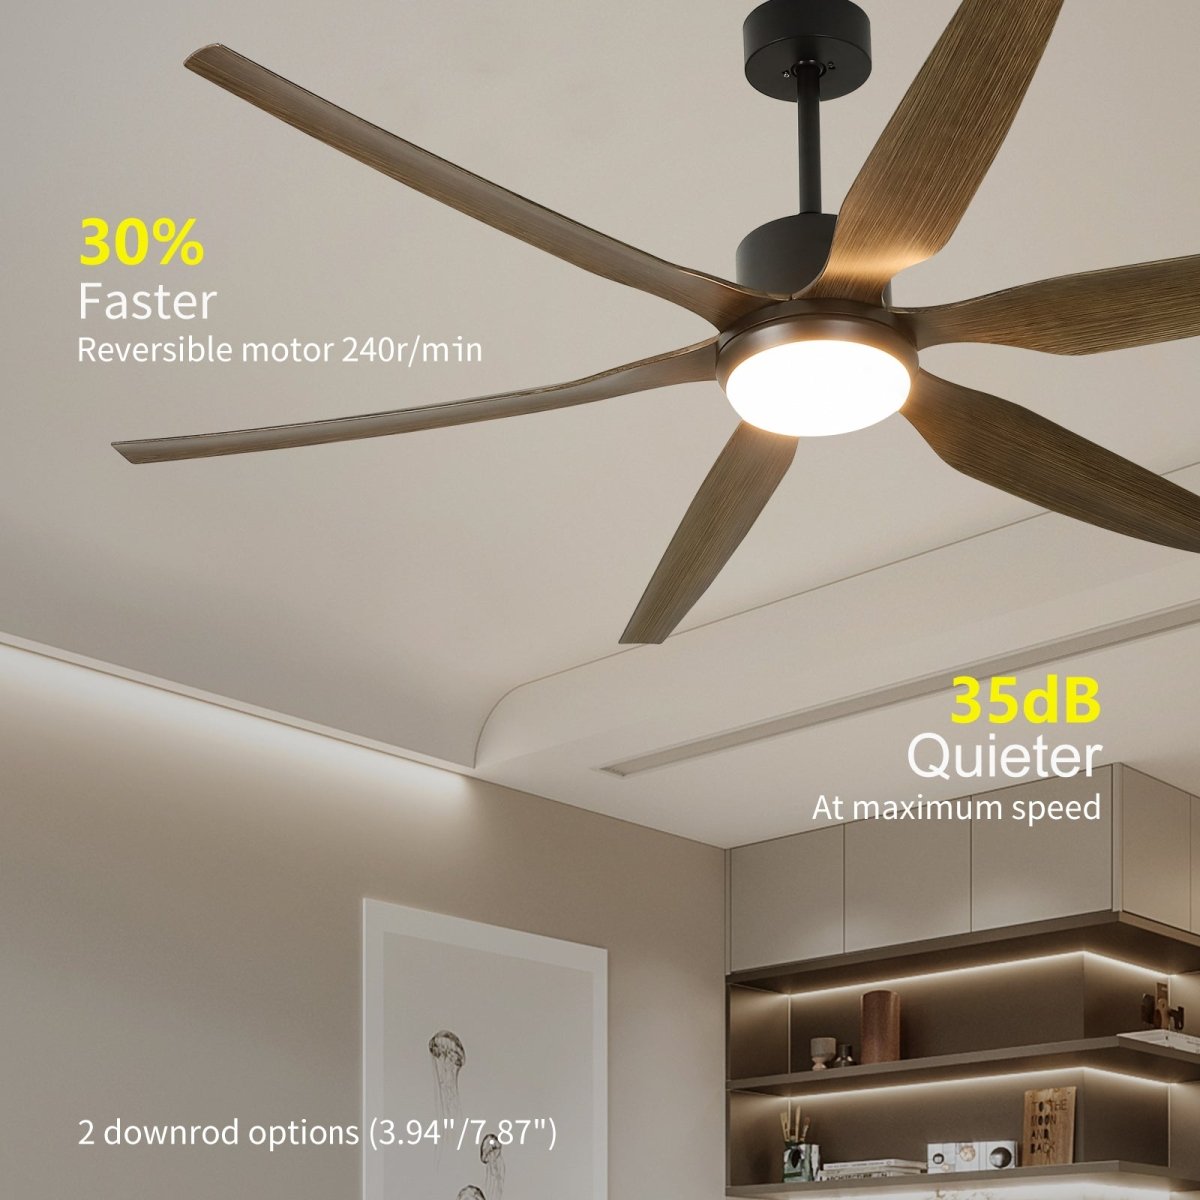 Depuley 66" Ceiling Fans with Lights Remote Control, Indoor Outdoor Black Ceiling Fan with 6 Blades, Dimmable Modern Room Fan for Patio Living Room, Summer House, Office, Reversible Quiet DC Motor - WS-FPZ32-12B 2 | DEPULEY